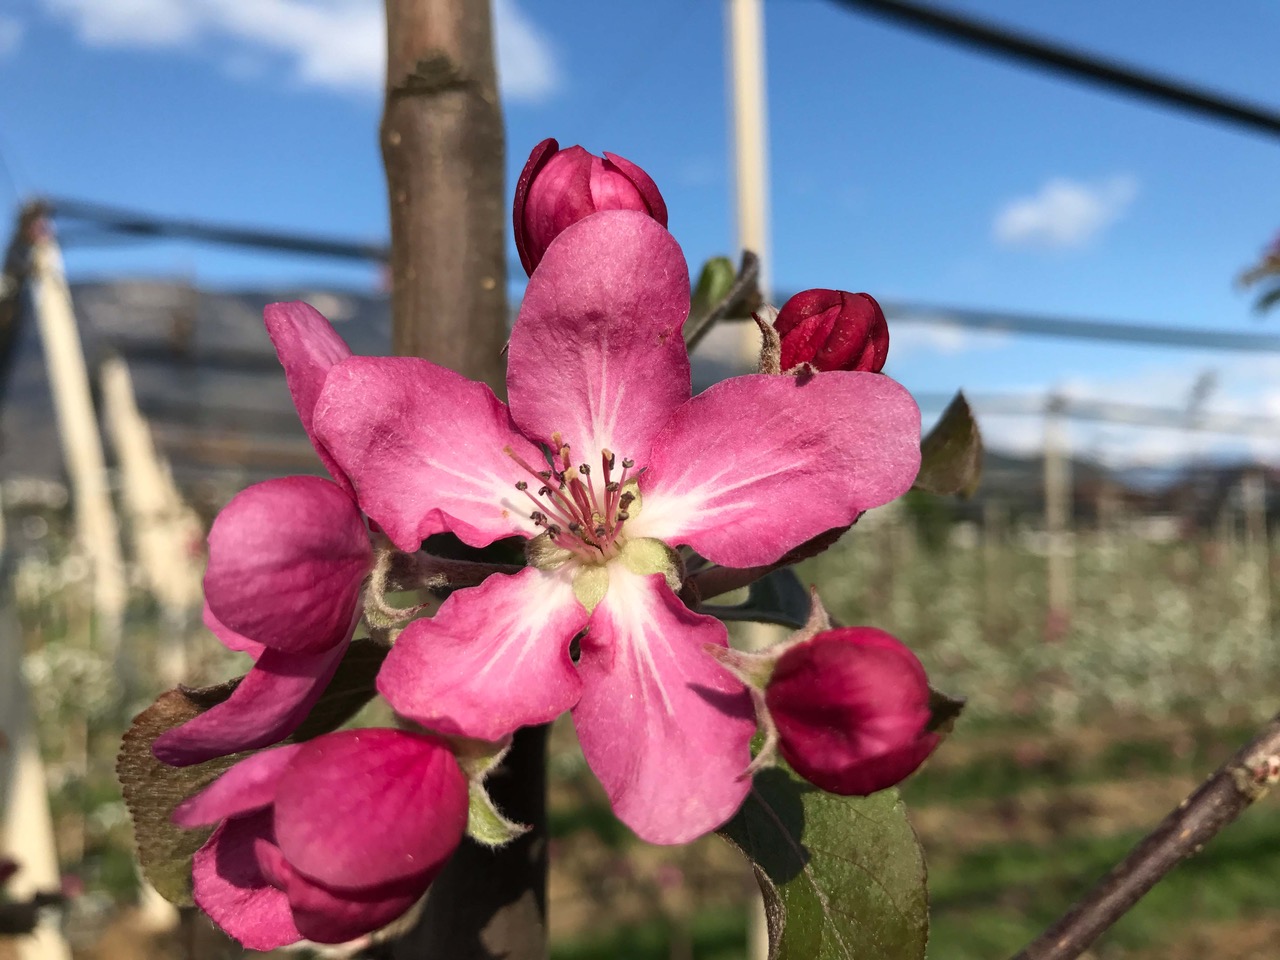 Red Moon® , blossom time and initiatives of the Italian red flesh apple are underway | Produce Report